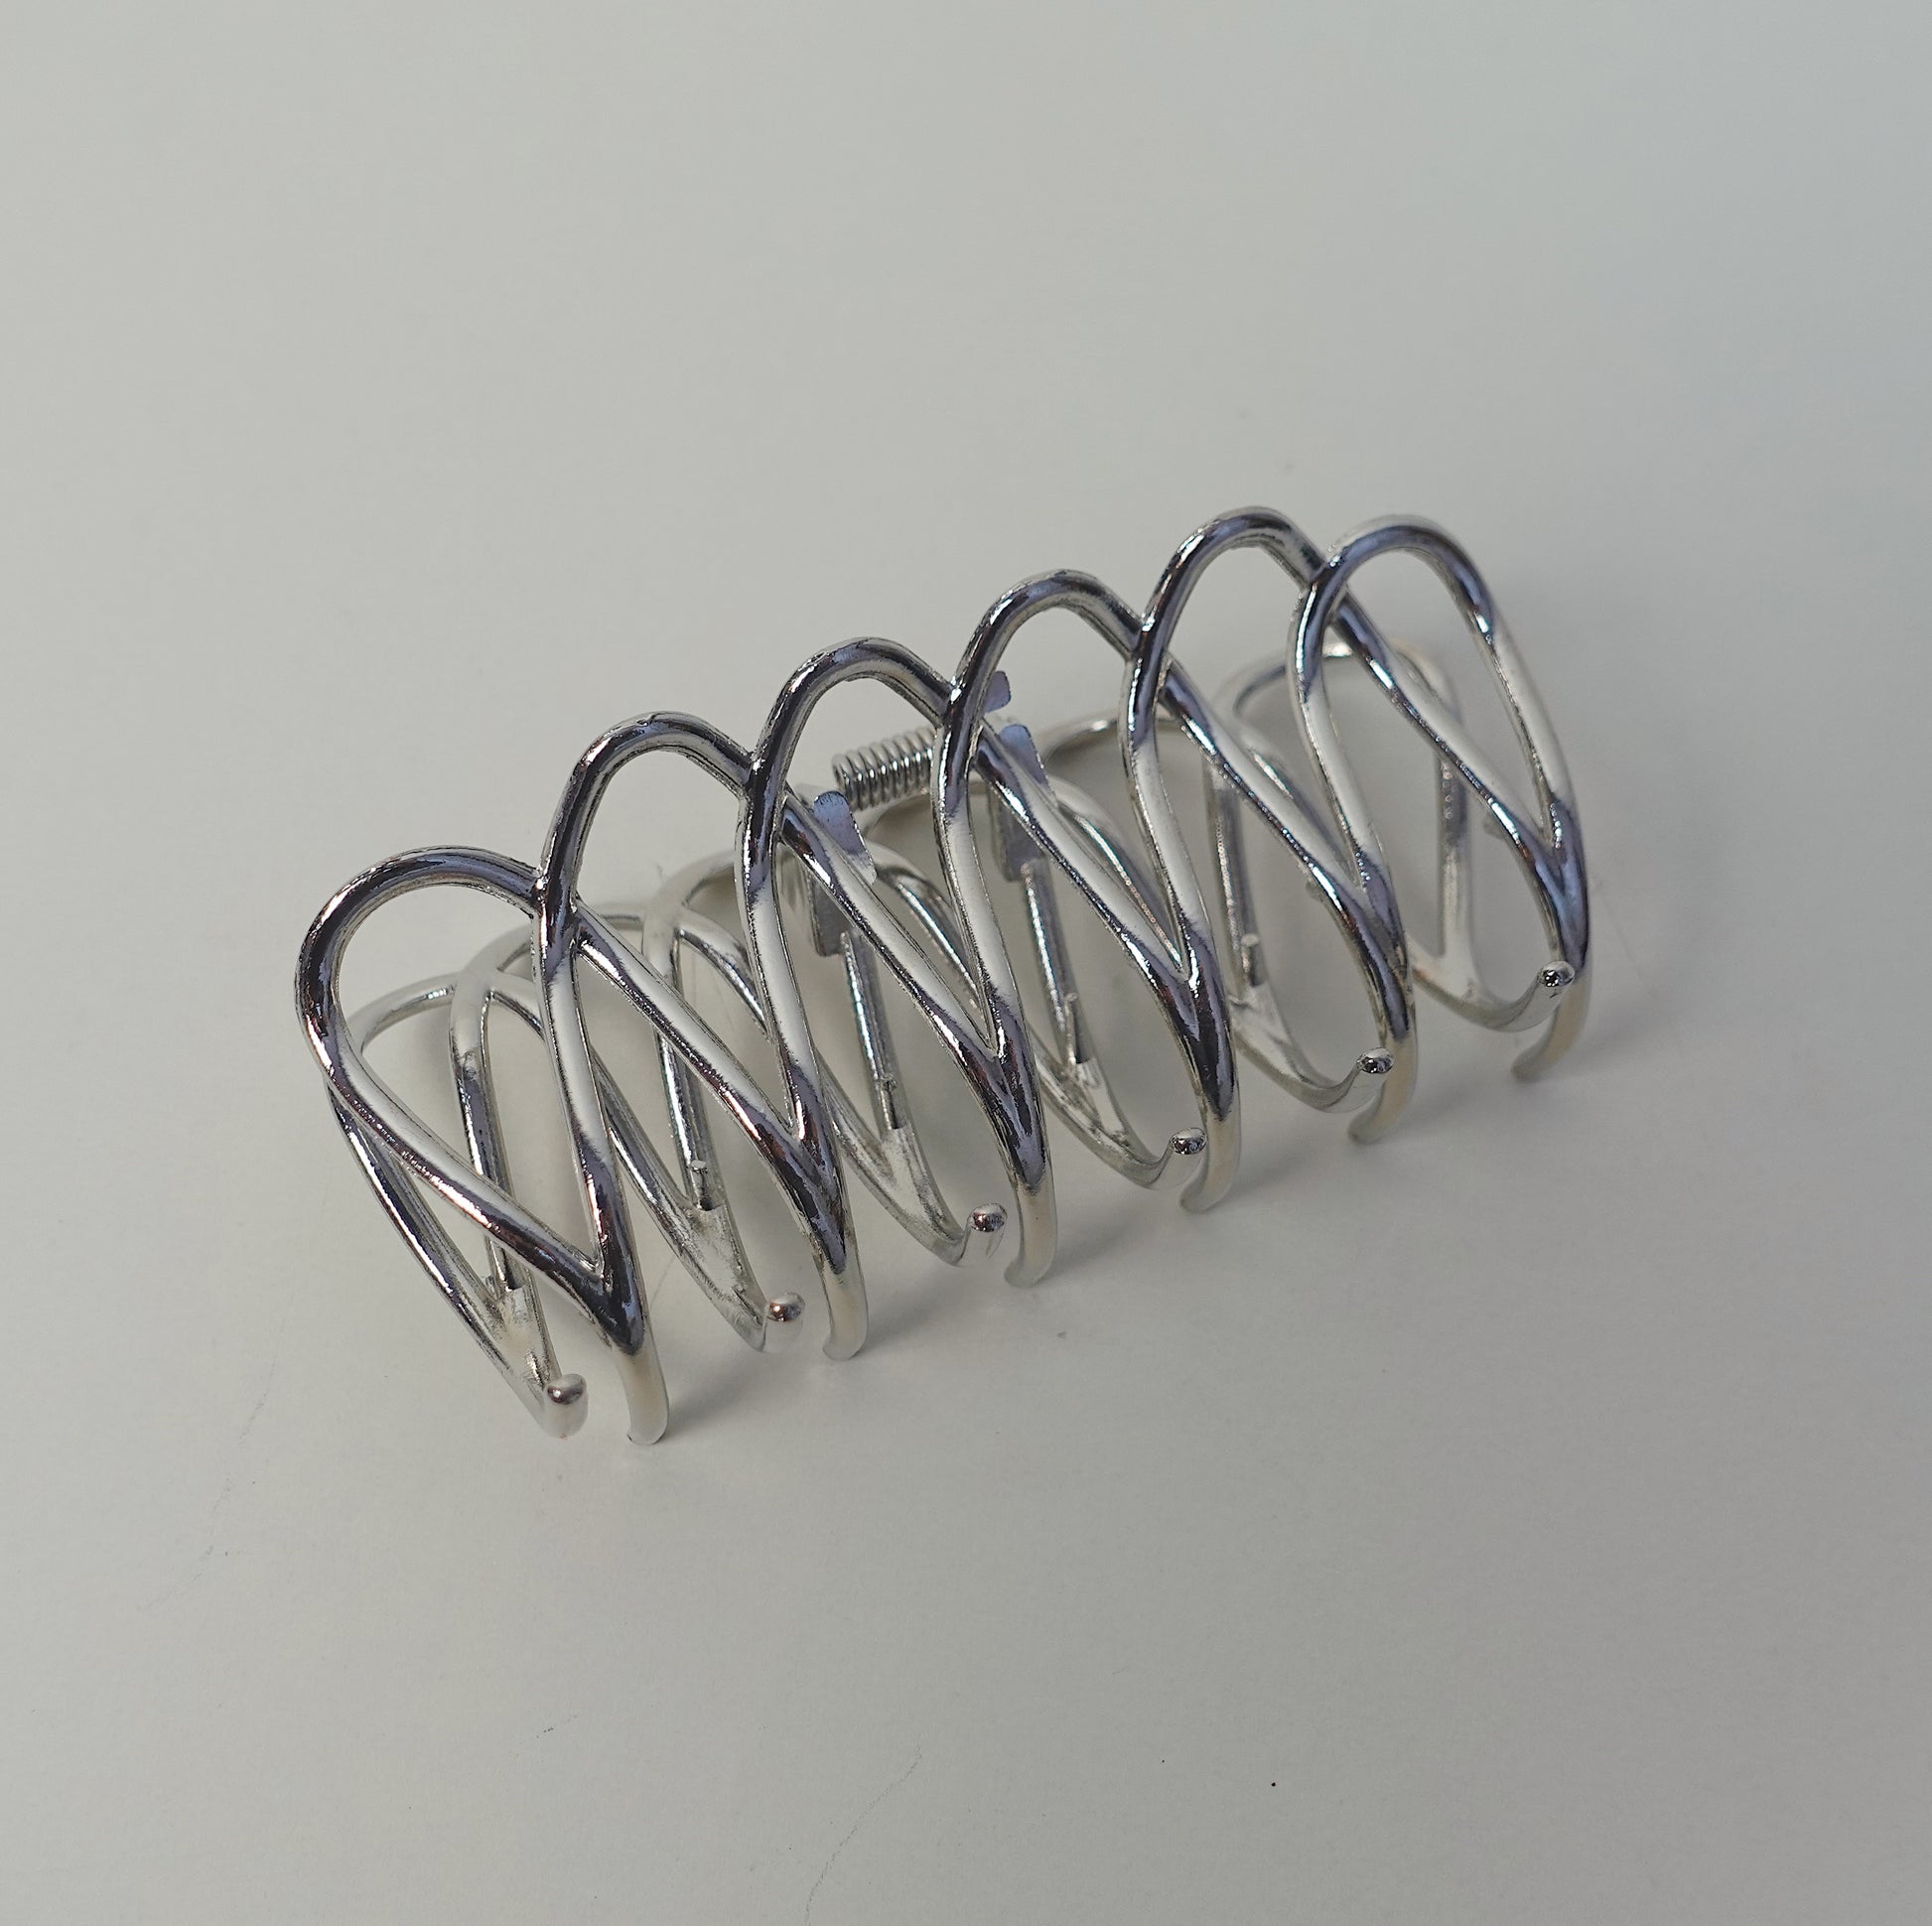 Metallic Claw Clips - Qwerky Colour